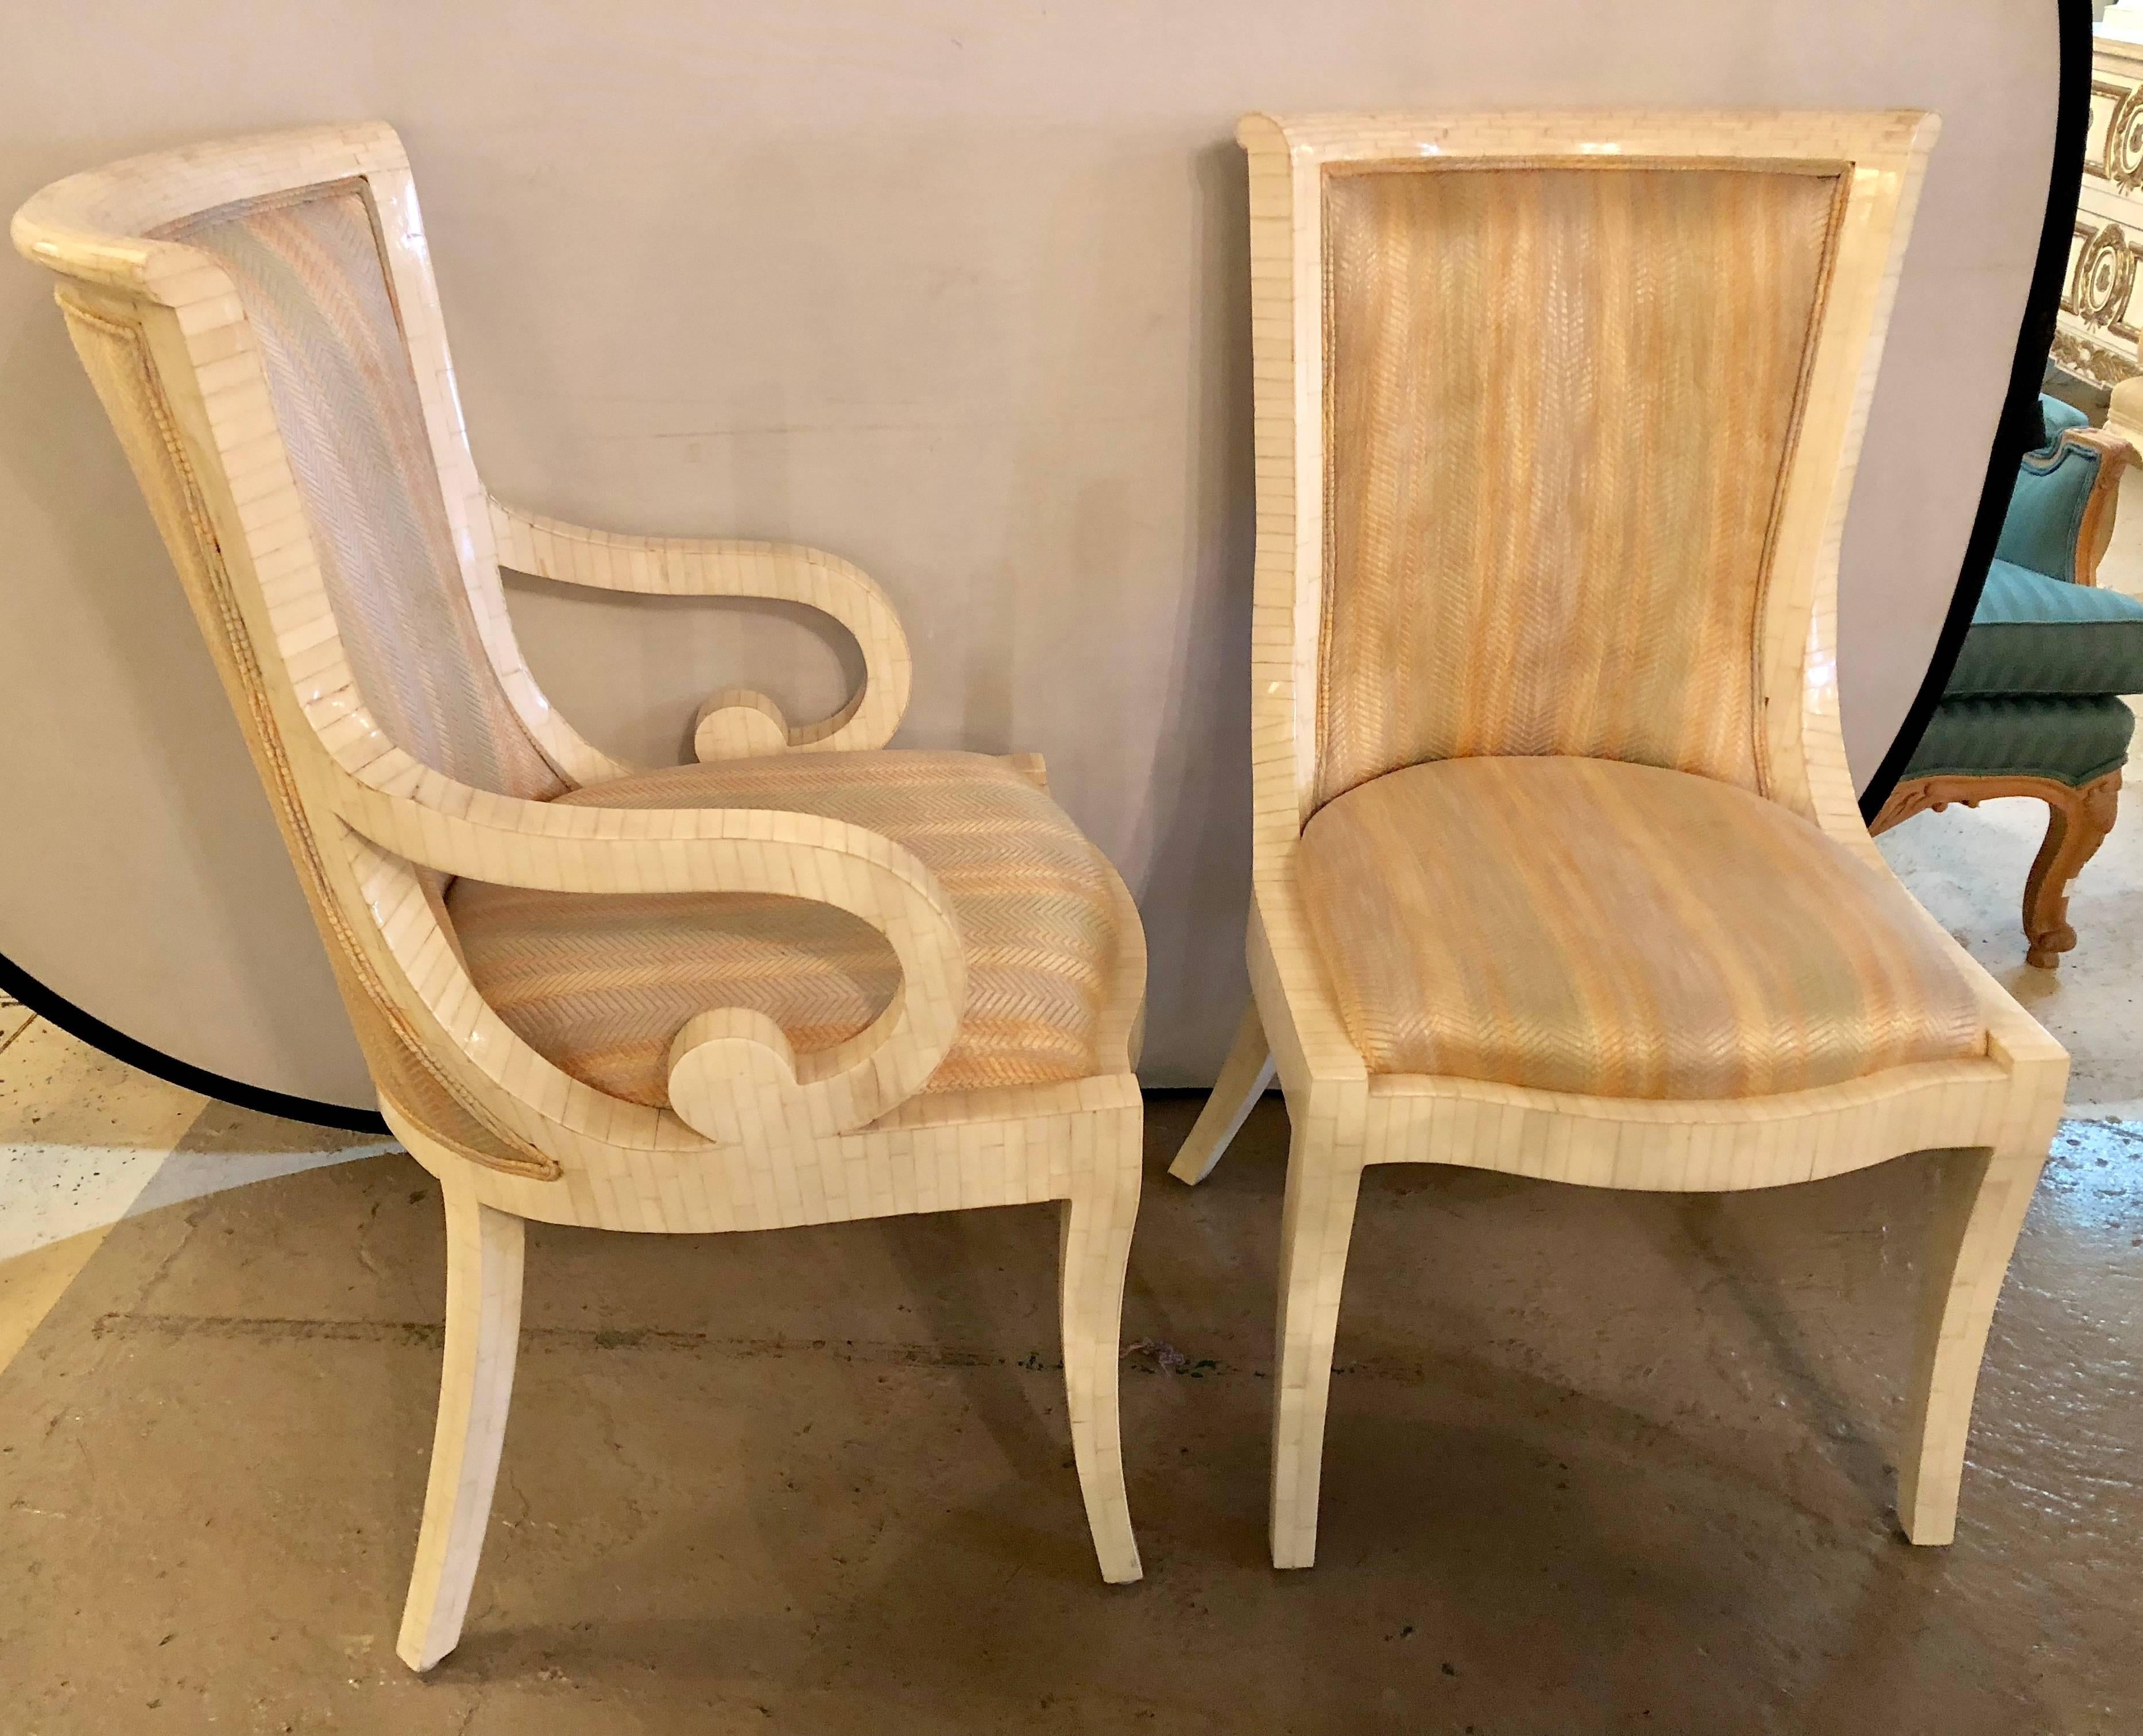 Set of six Enrique Garcel bone tassellated dining chairs manner of Karl Springer. Set of six Mid-Century Modern tessellated bone and upholstered dining chairs attributed to Karl Springer. Features two armchairs and four side chairs. Upholstery in